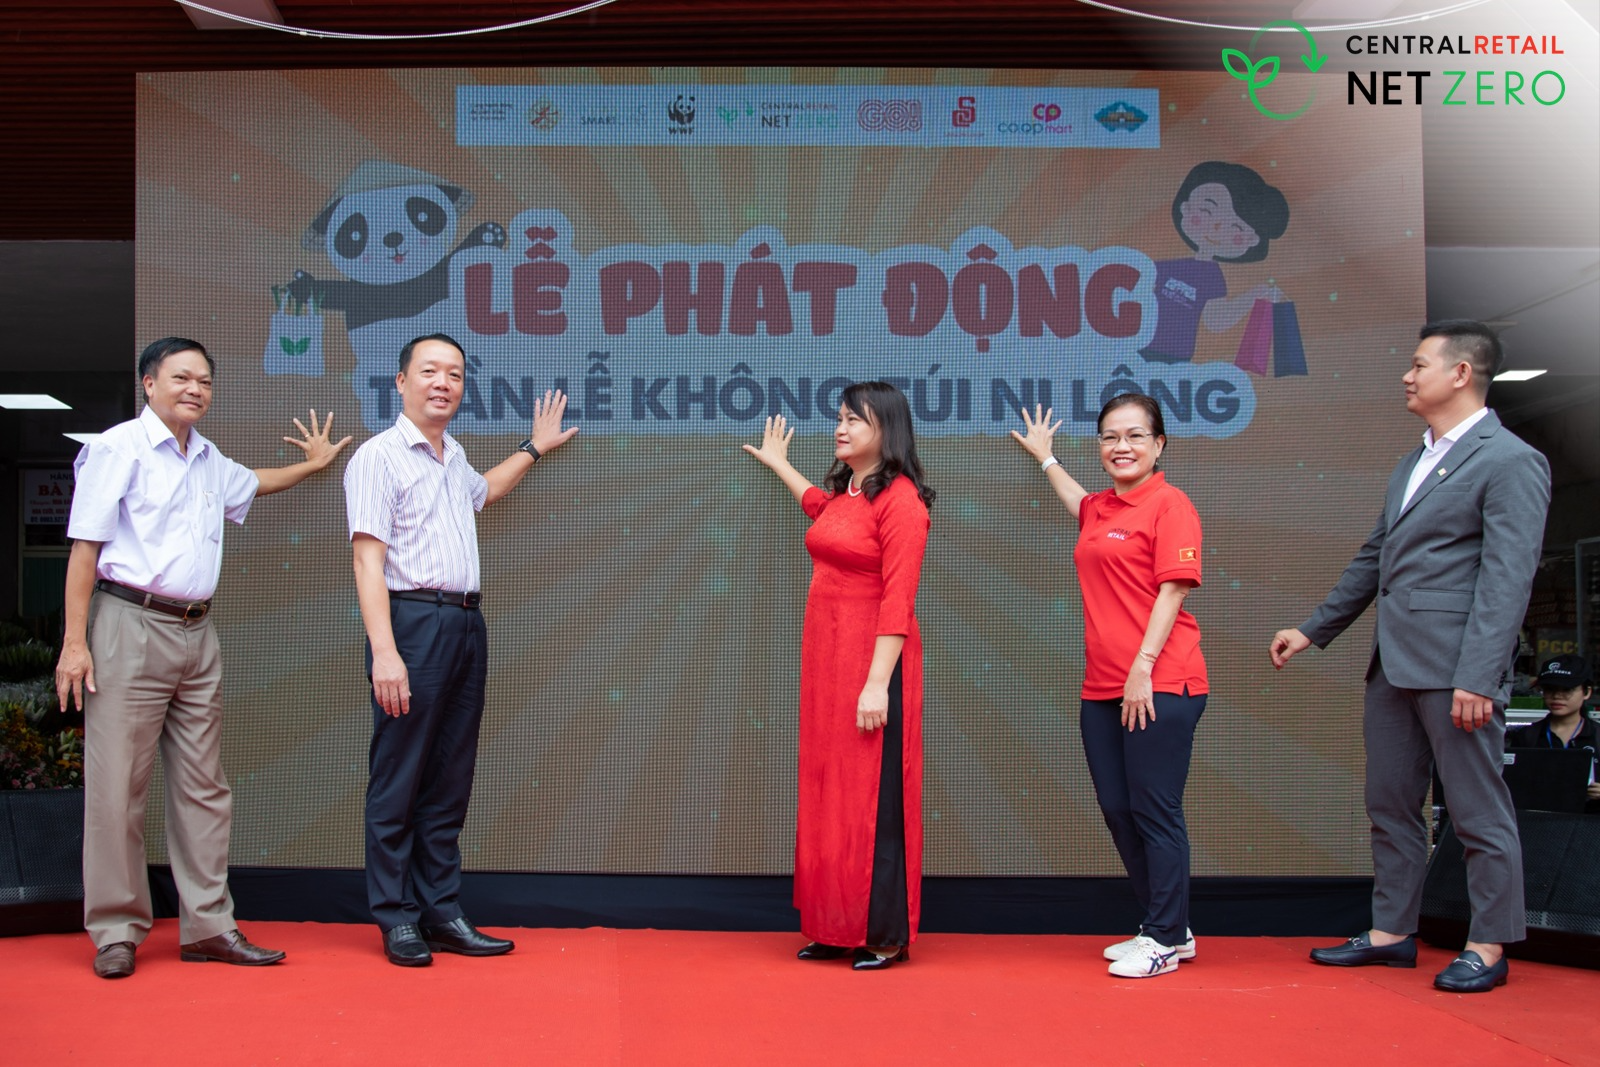 Central Retail in Vietnam and GO! Hue gather for the launch of “No Plastic Bags Week” in Hue City